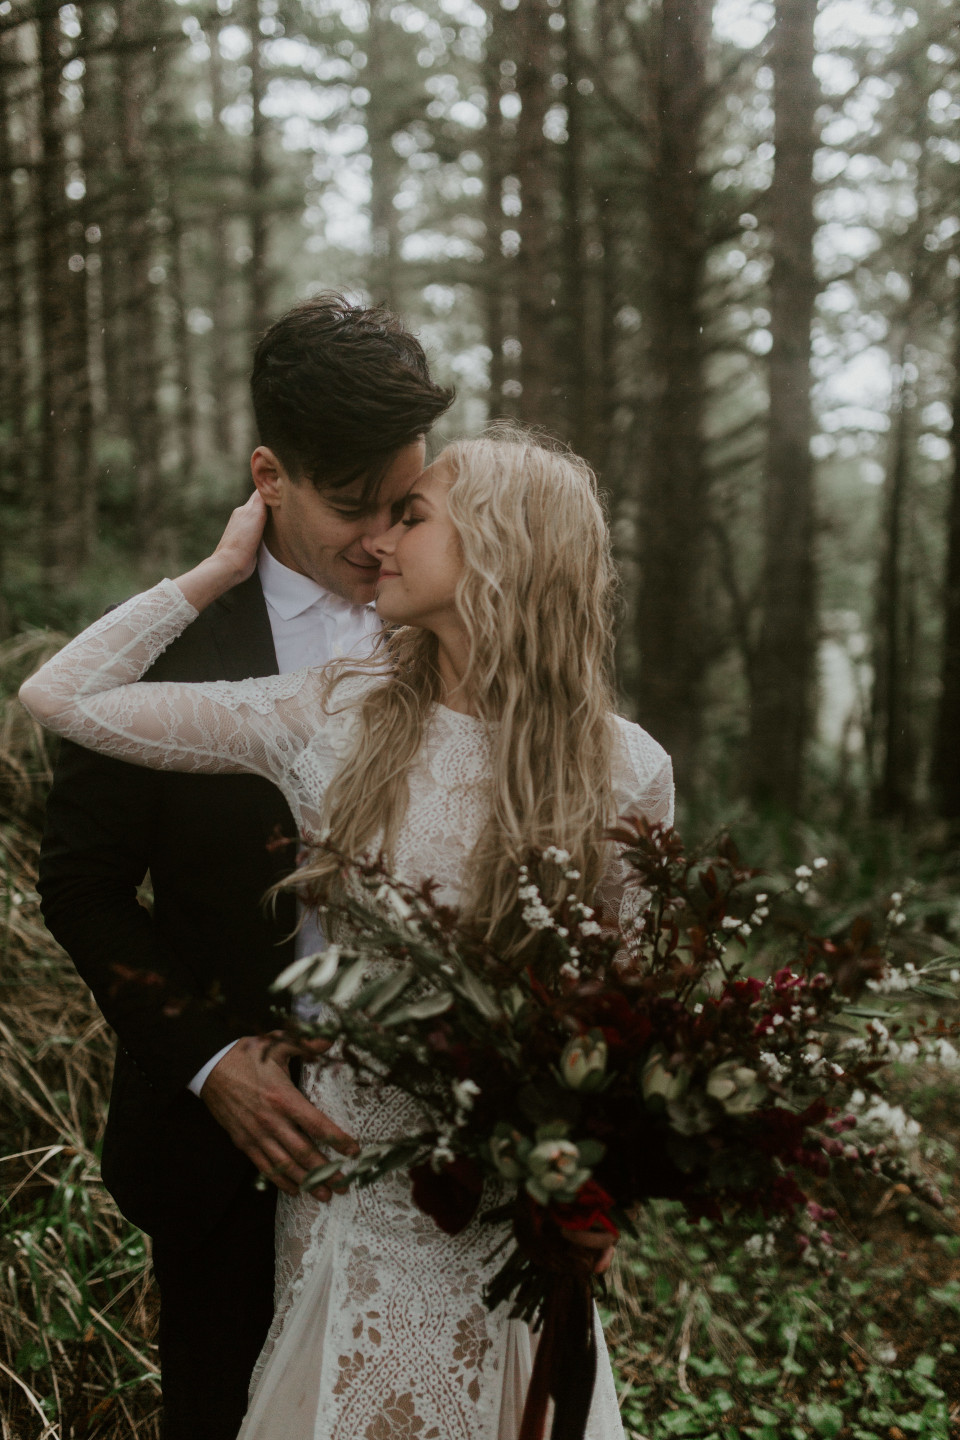 Hannah and Grant during their Oregon coast elopement at Cannon Beach, Oregon. Wedding photography in Portland Oregon by Sienna Plus Josh.